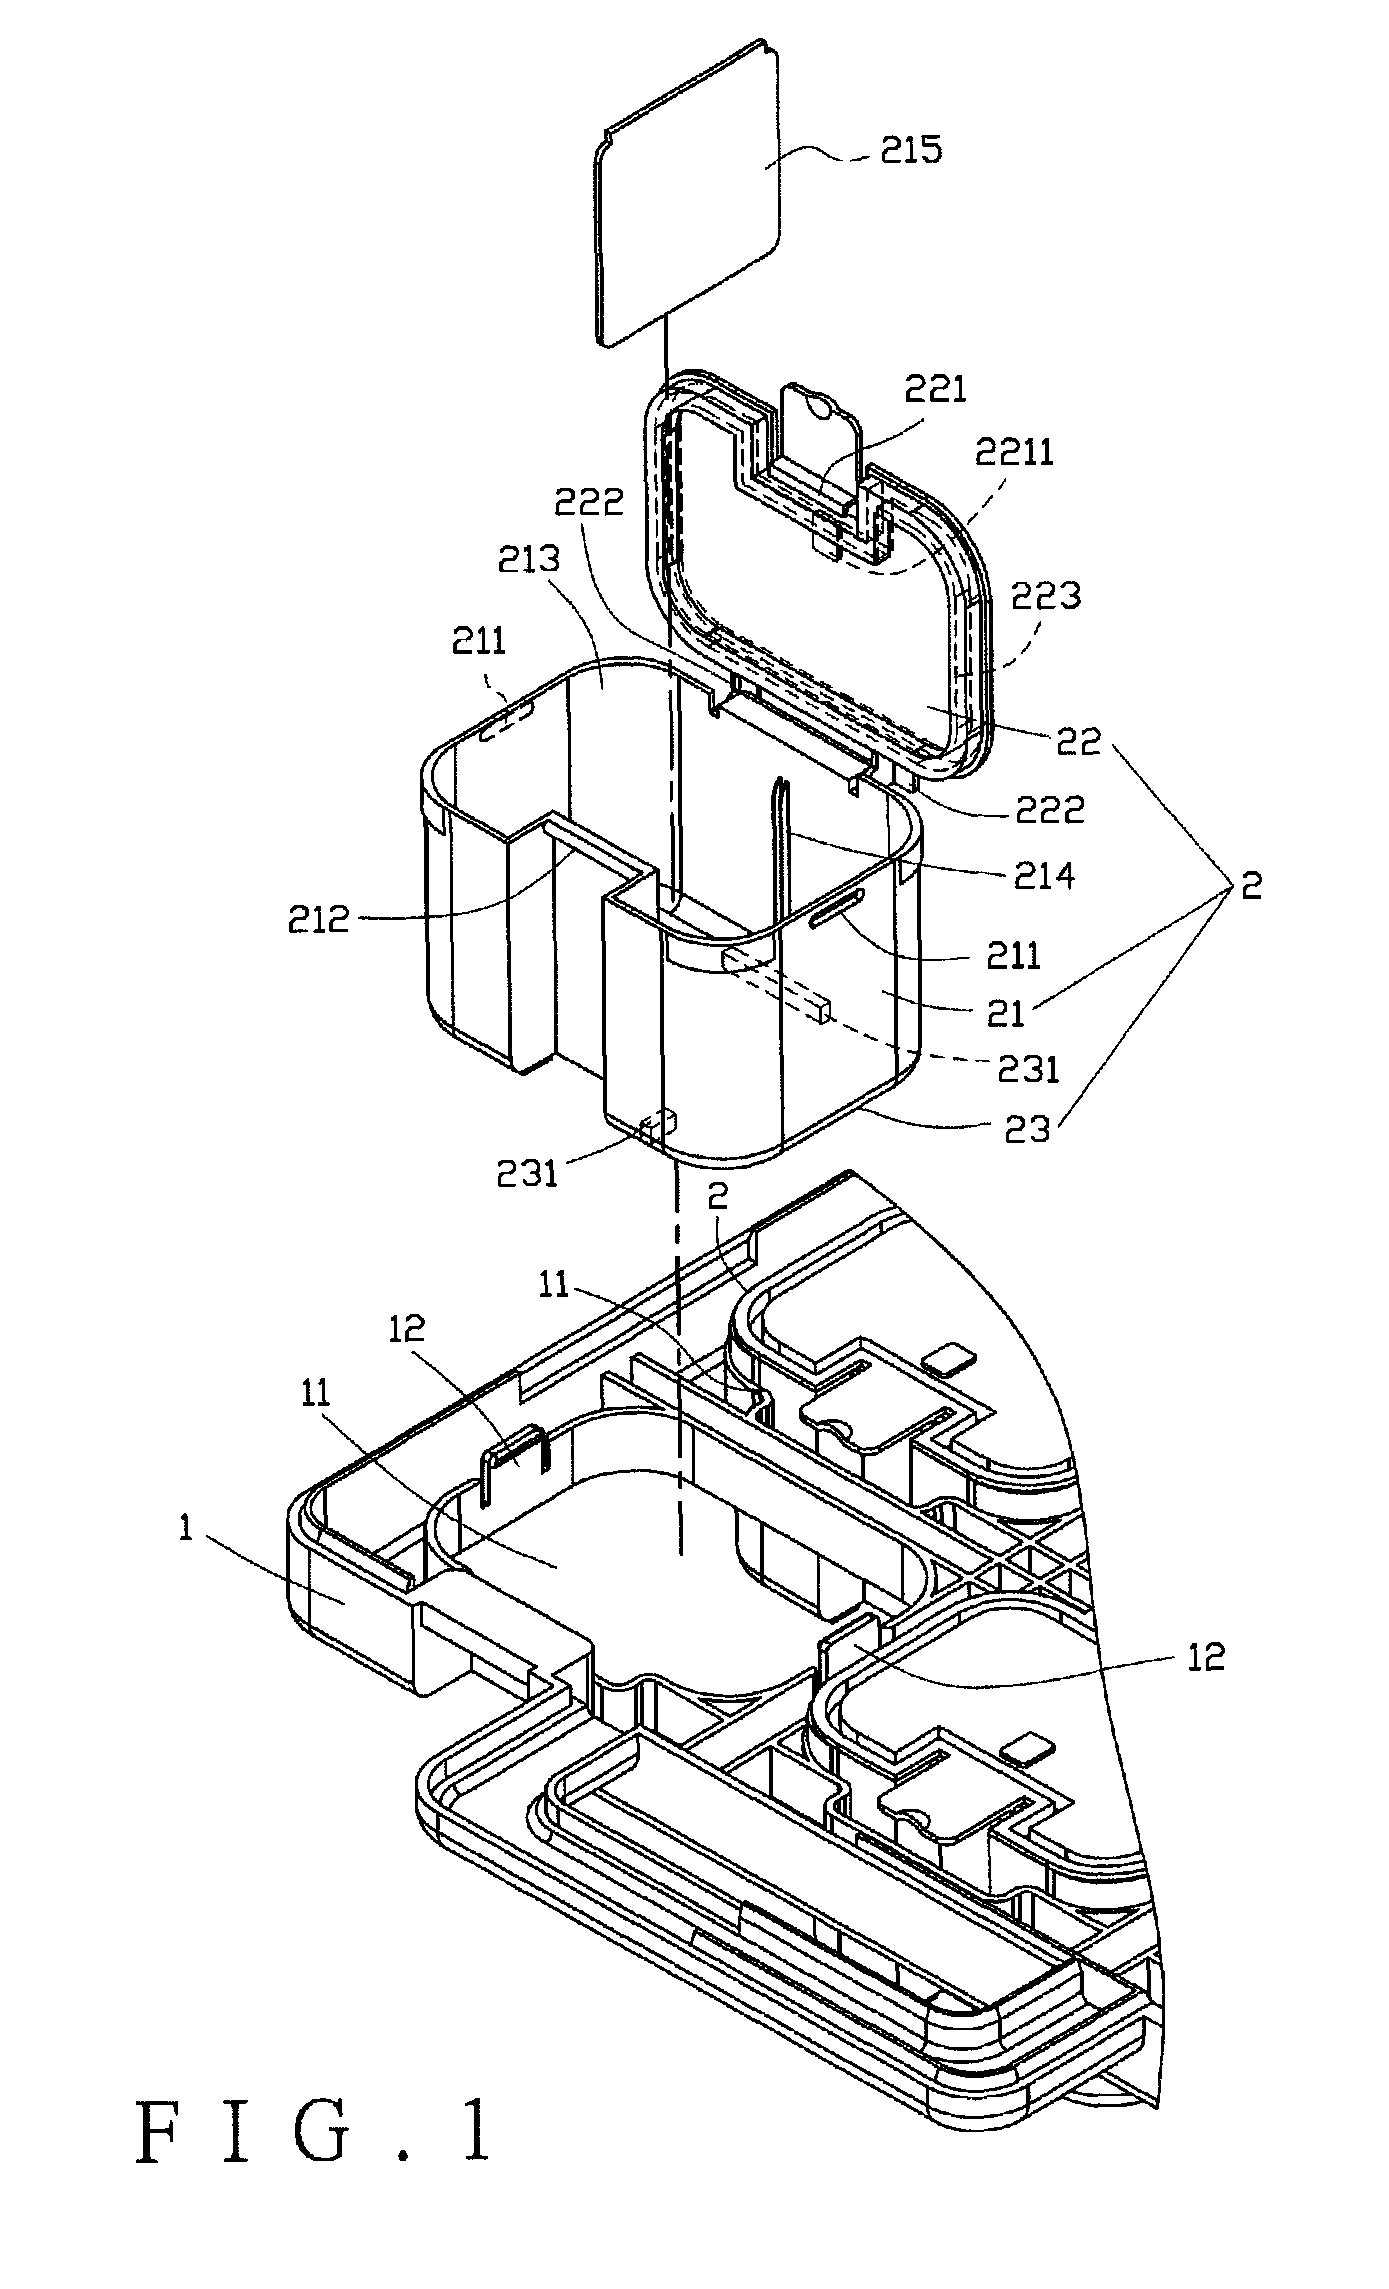 Carrier unit for carrying parts boxes